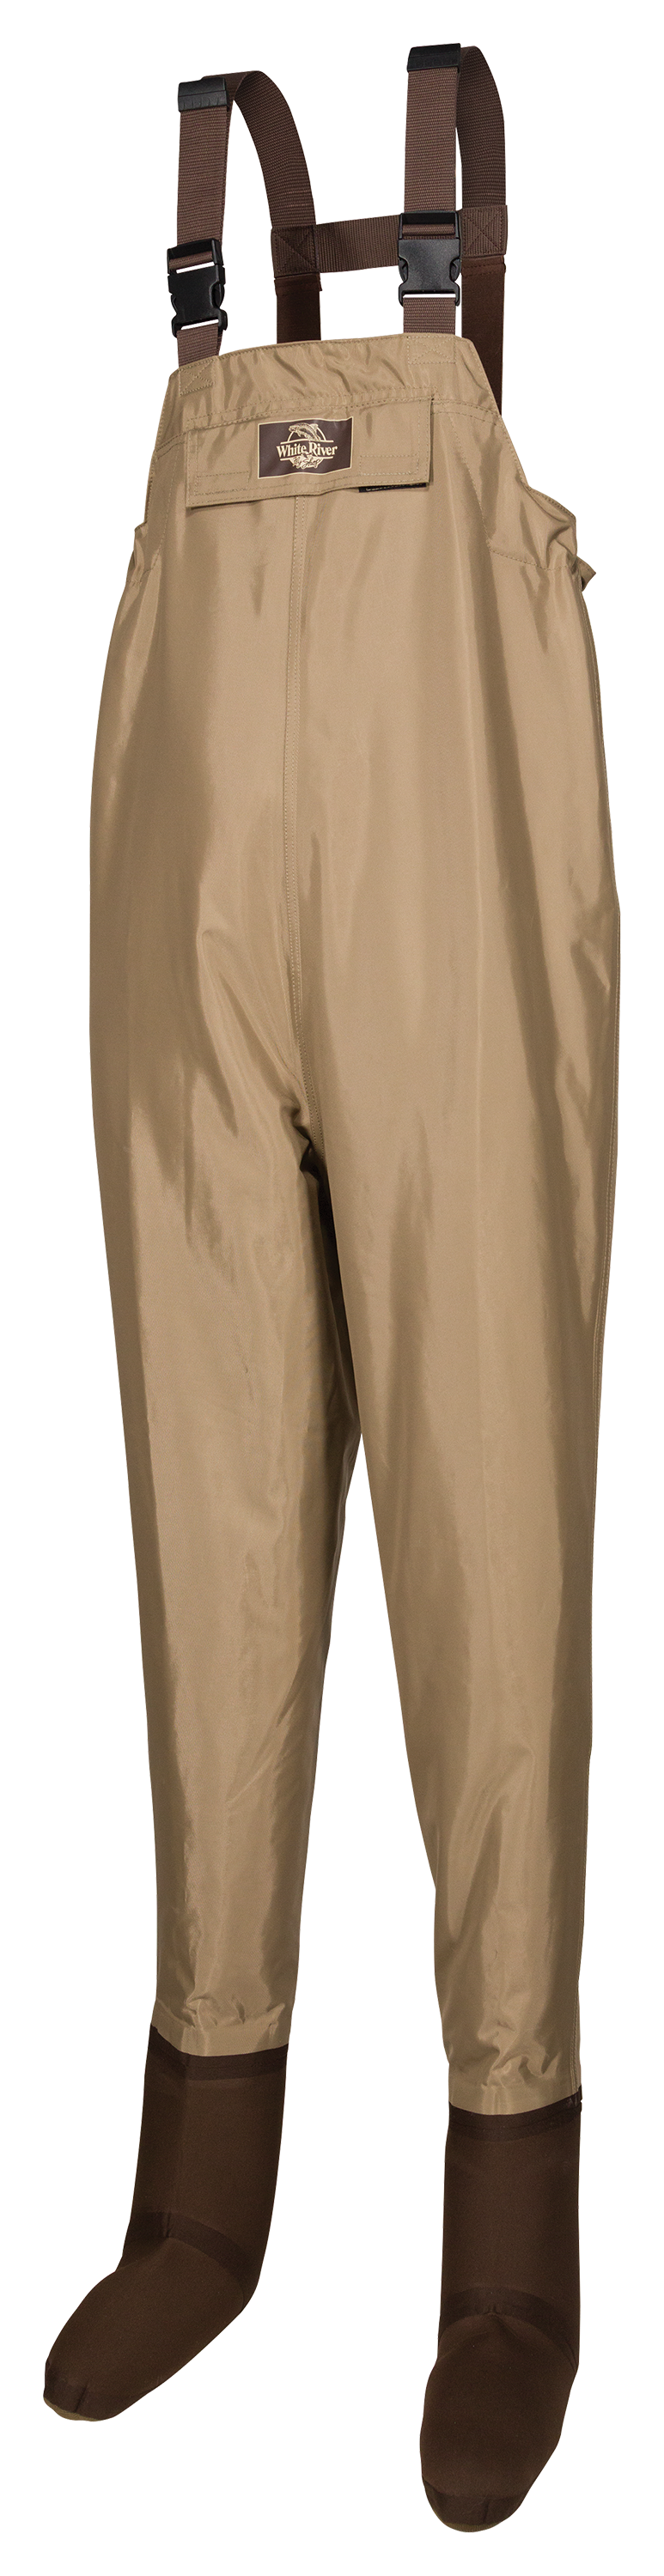 White River Fly Shop Three Forks Stocking-Foot Chest Waders for